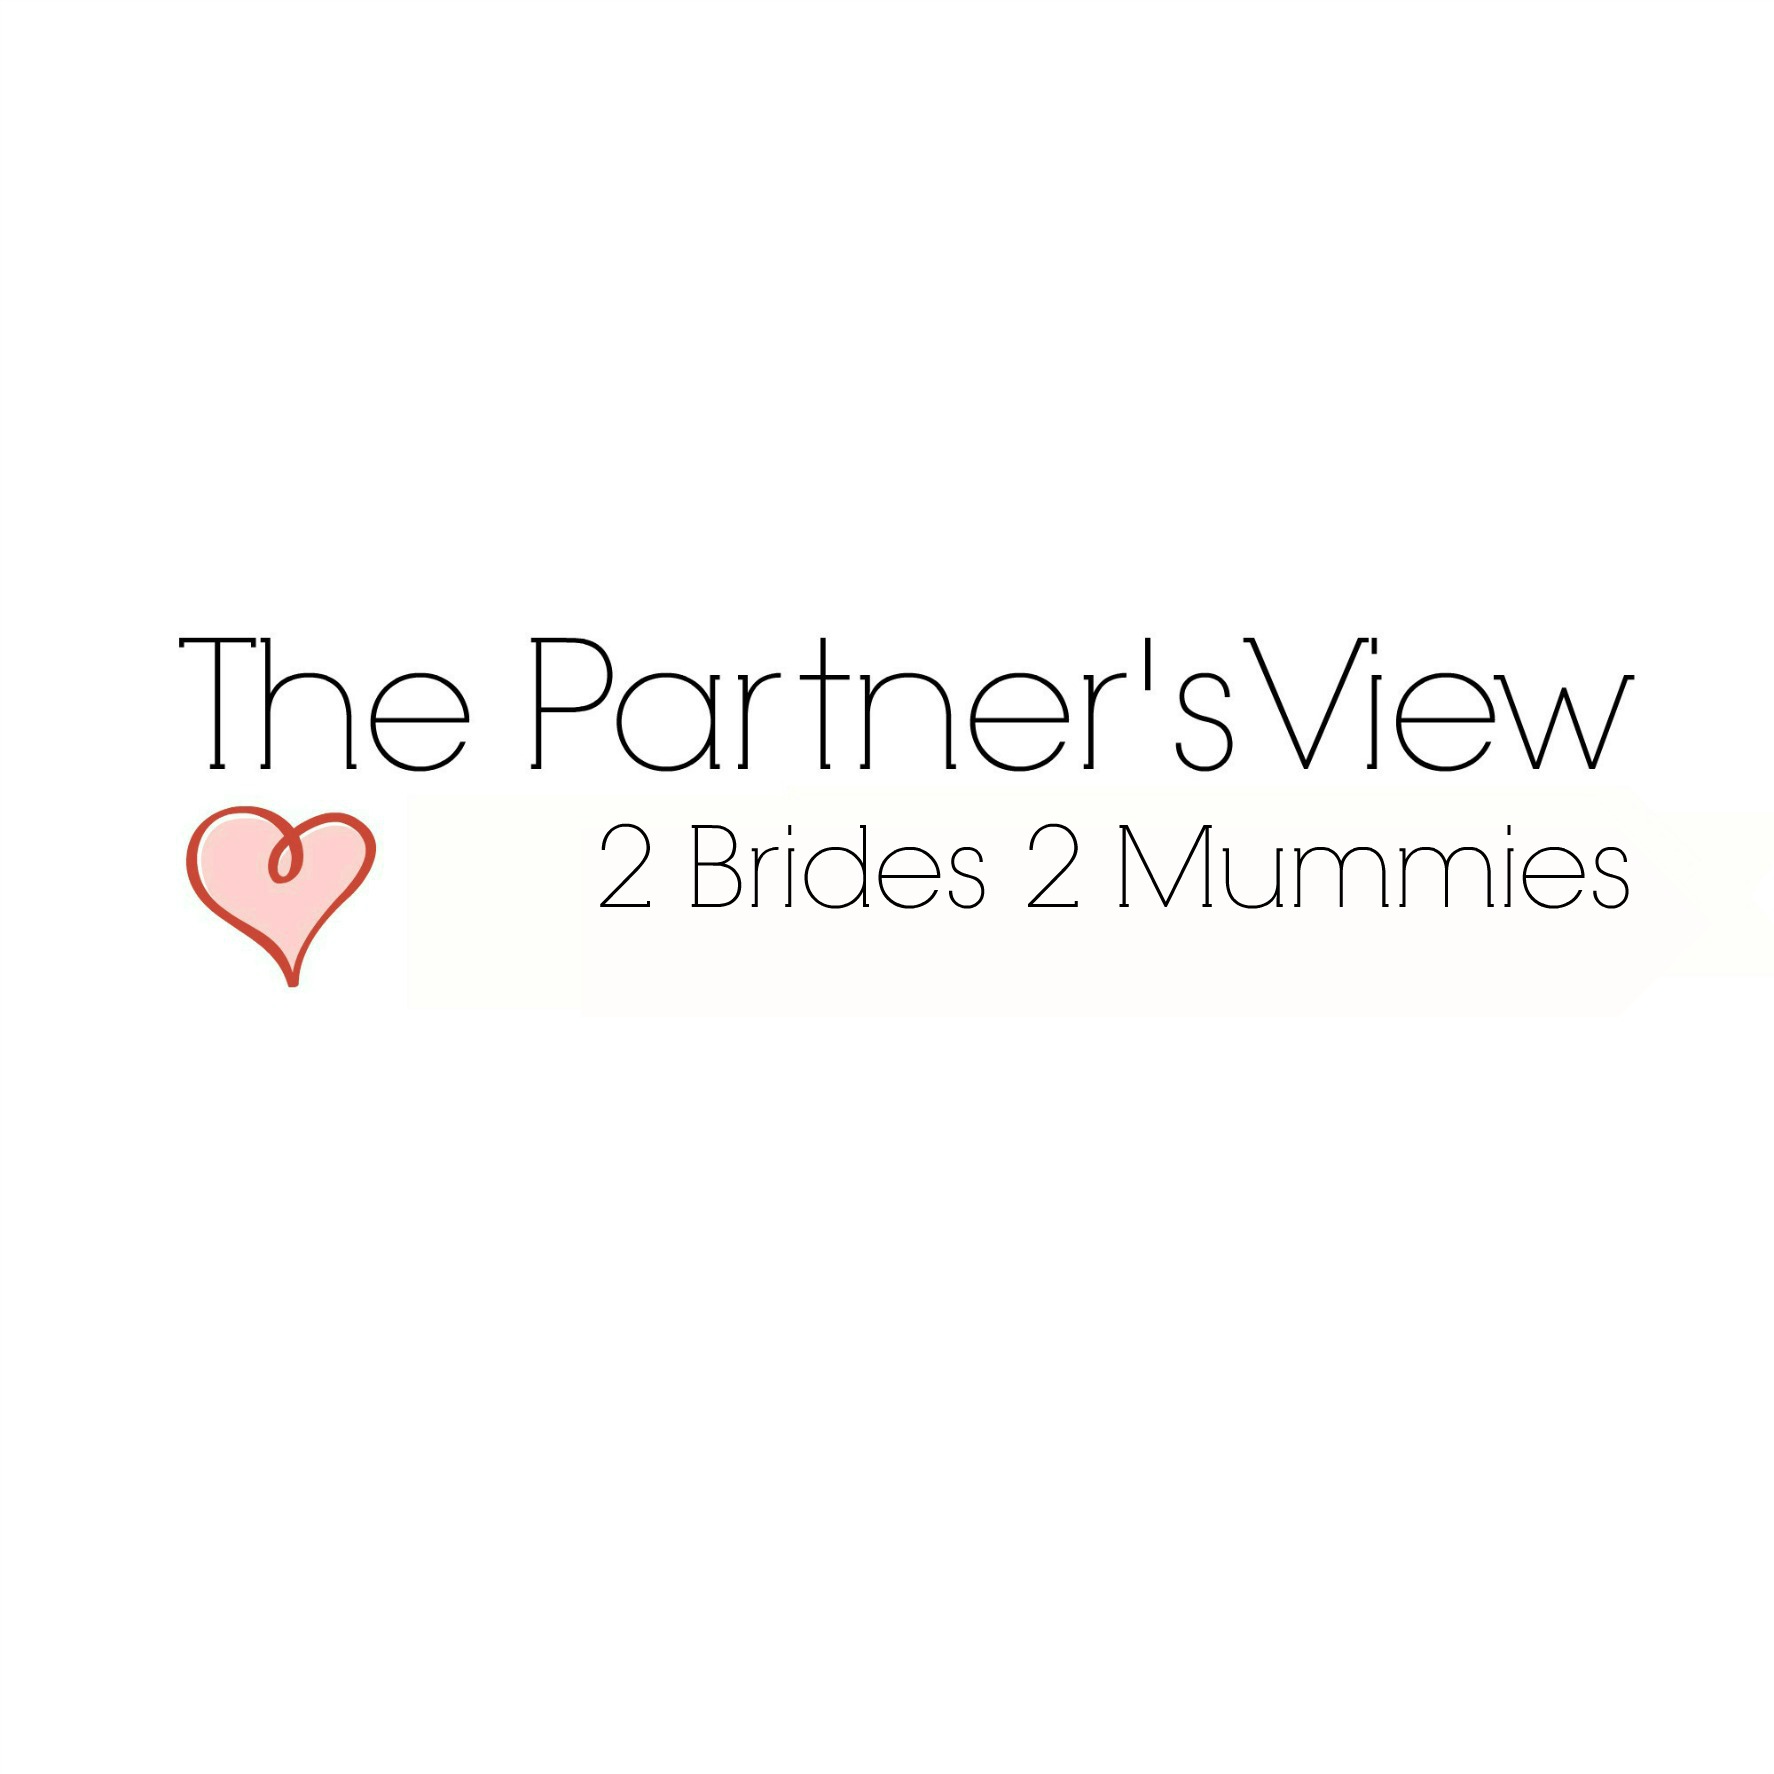 The Partners View featuring 2 Brides 2 Mummies